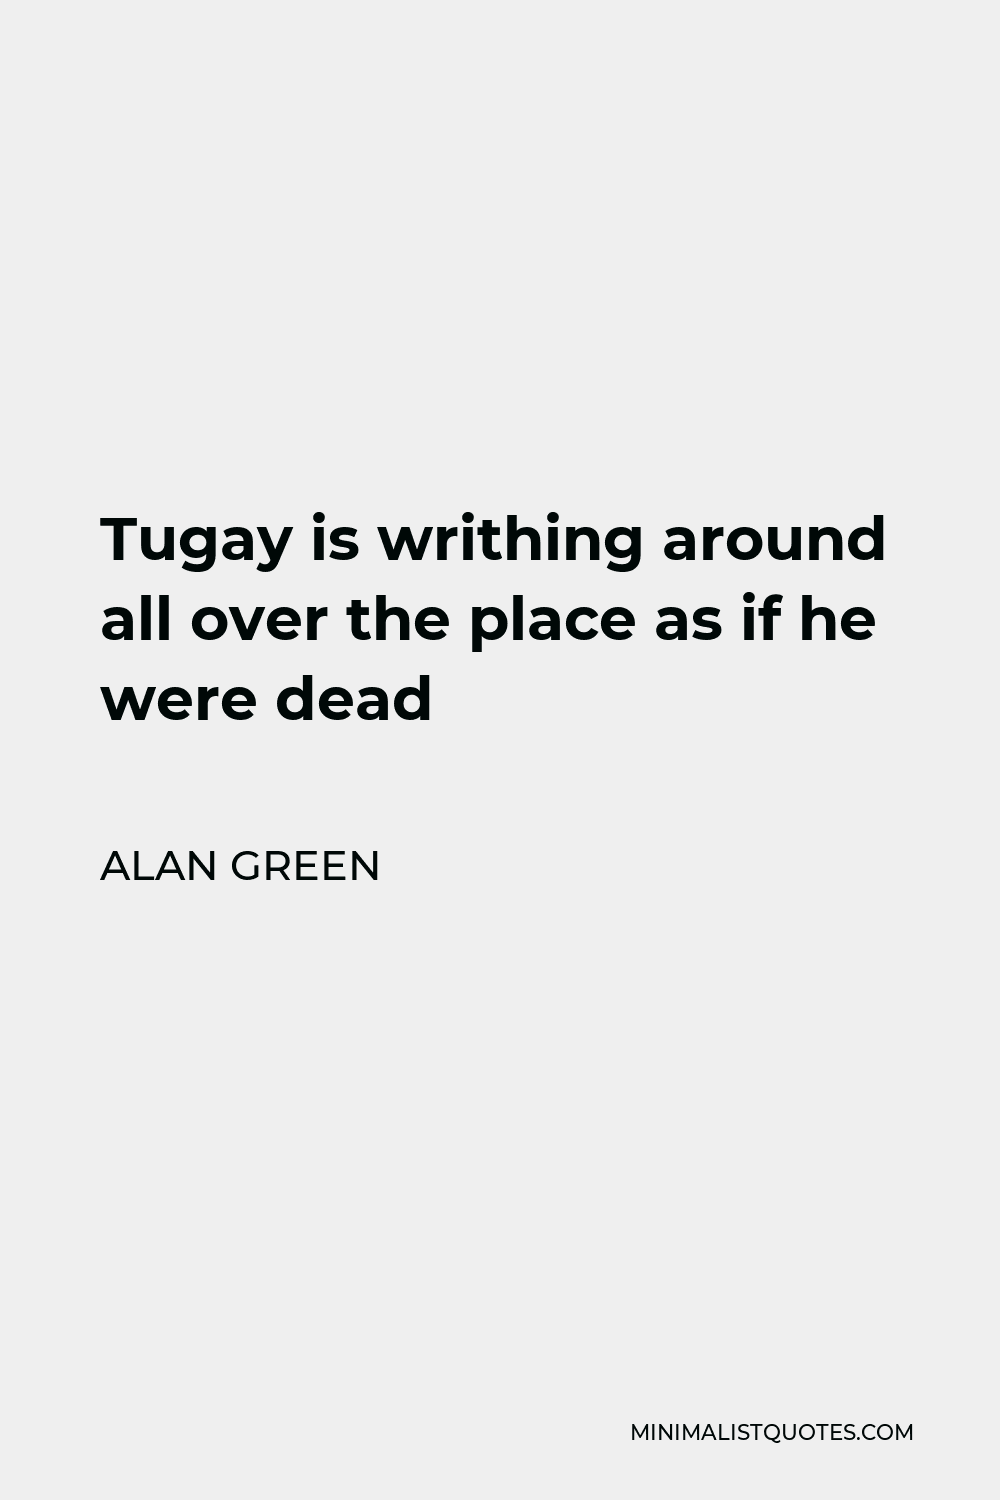 Alan Green Quote - Tugay is writhing around all over the place as if he were dead